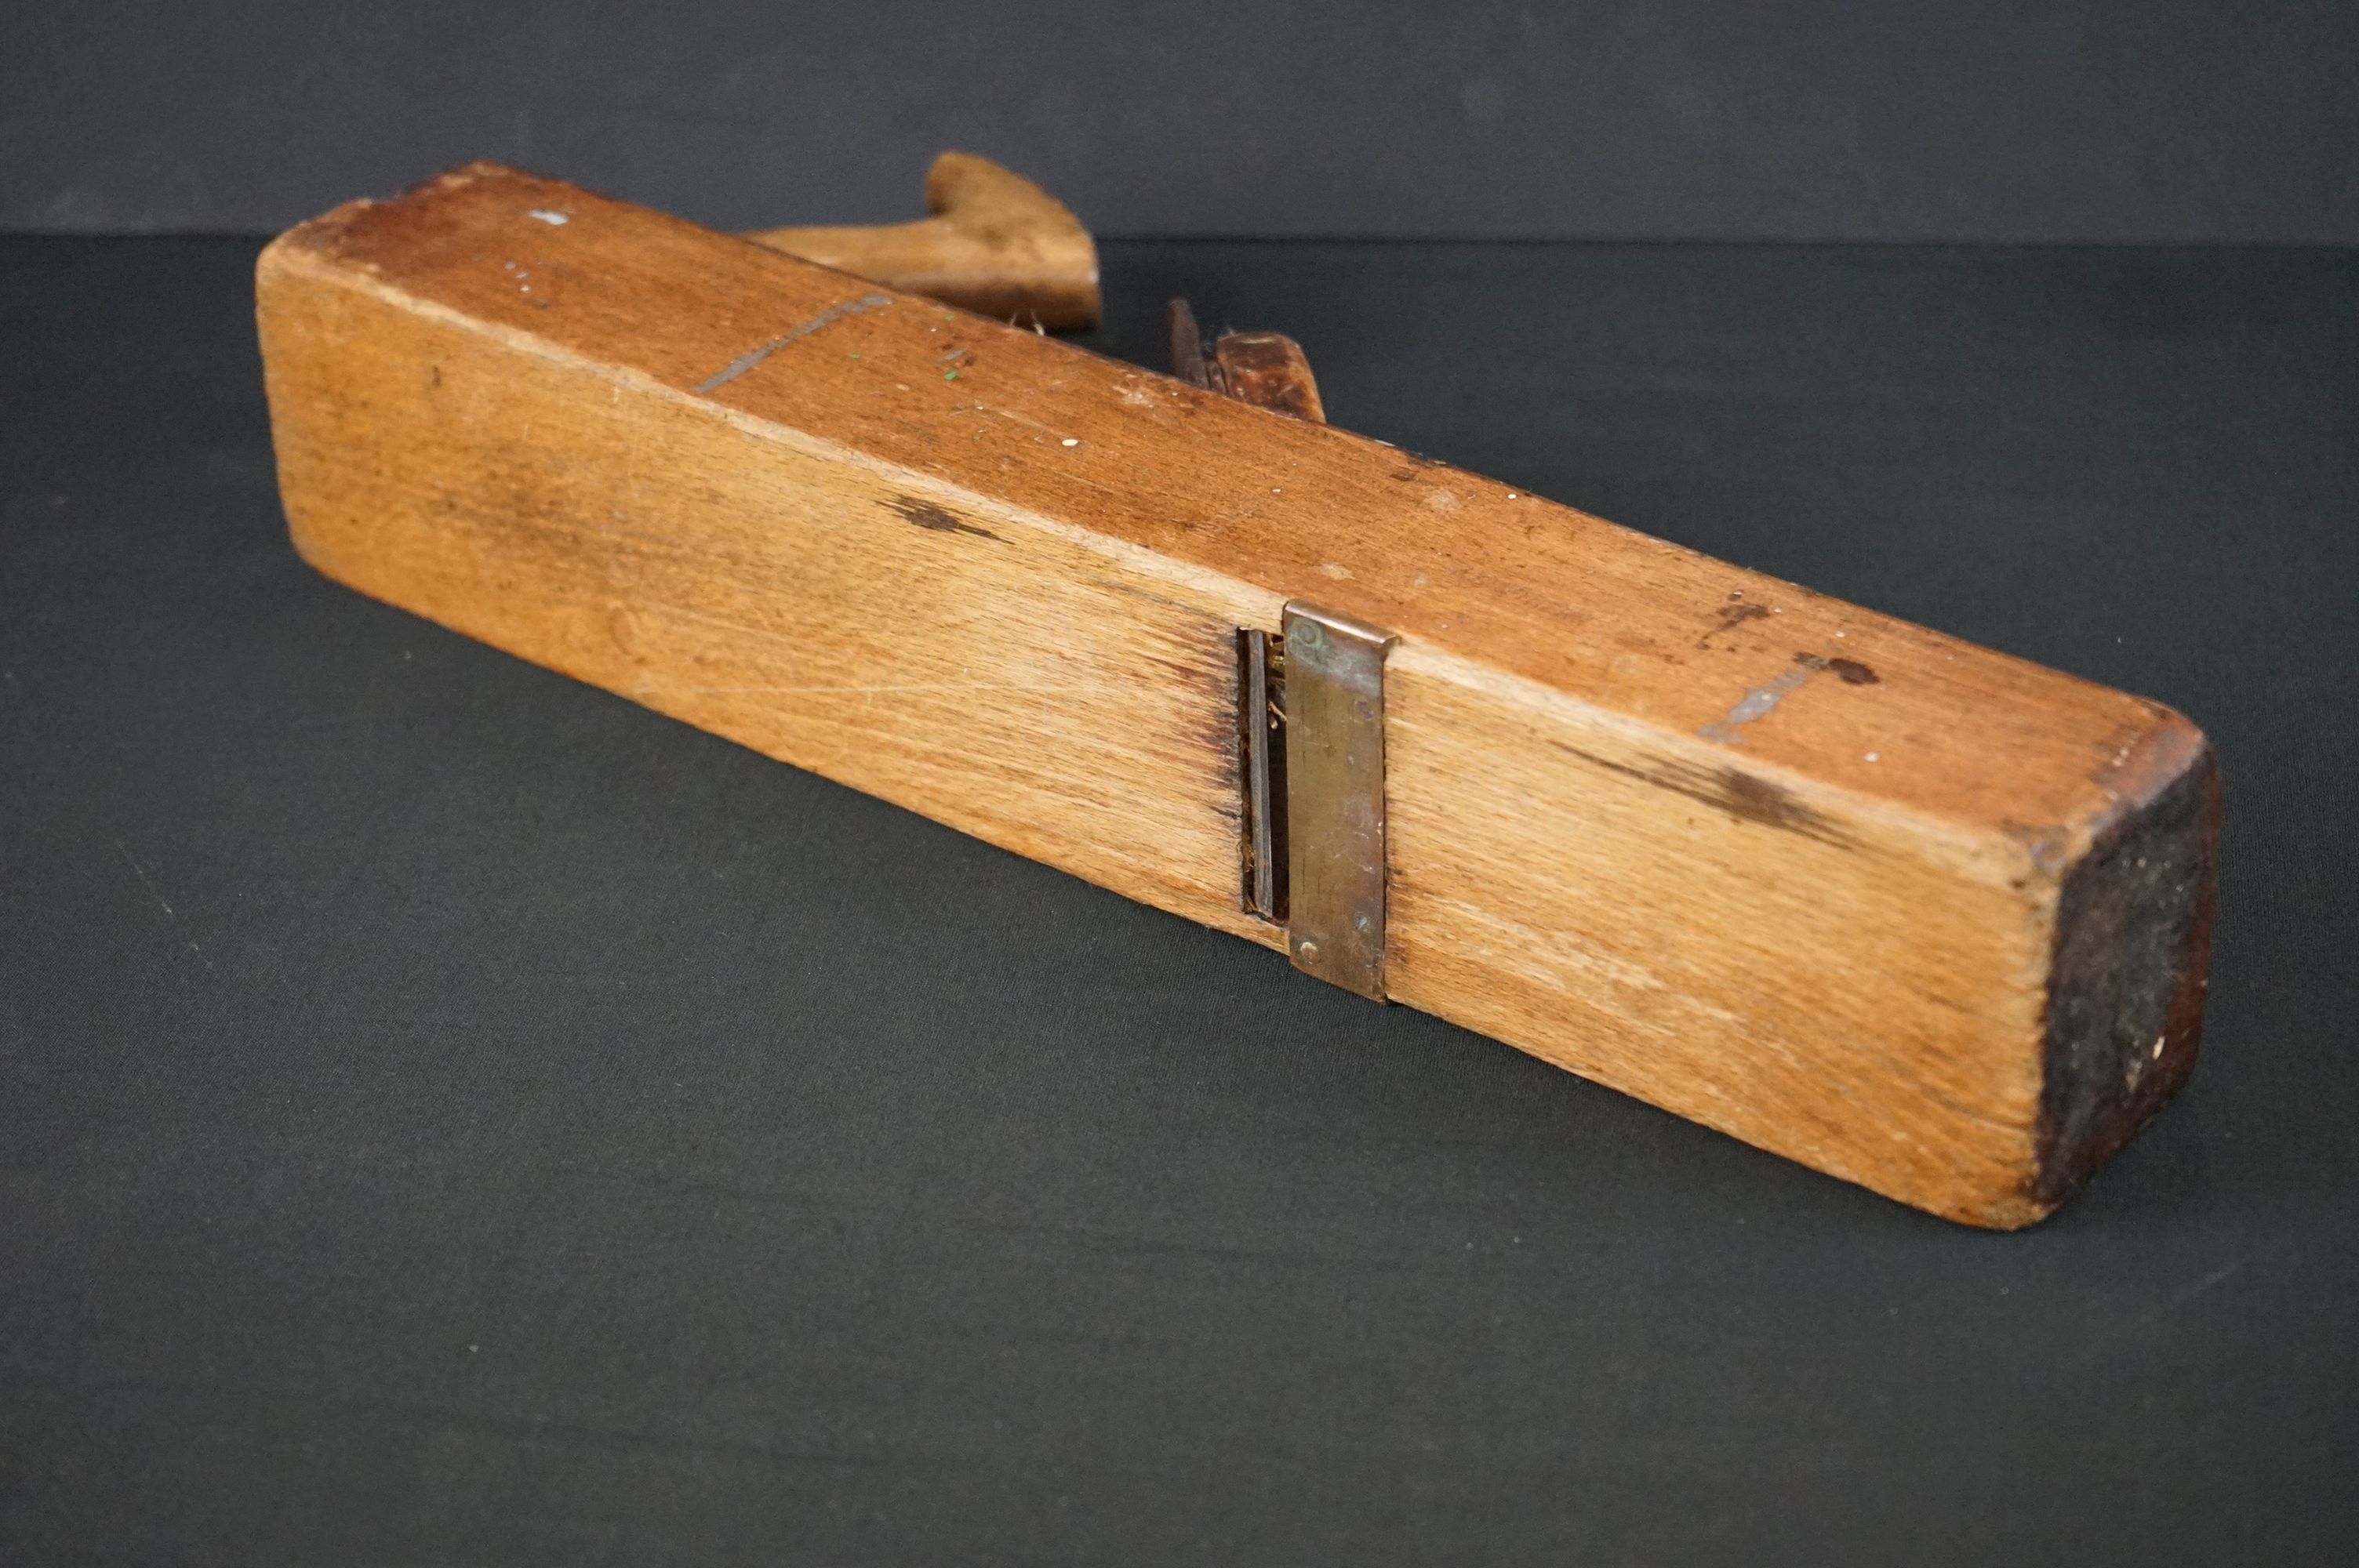 Late 19th century Wooden Sash Fillister Plane by Varville and Sons of York together with a 16" Beech - Image 3 of 6